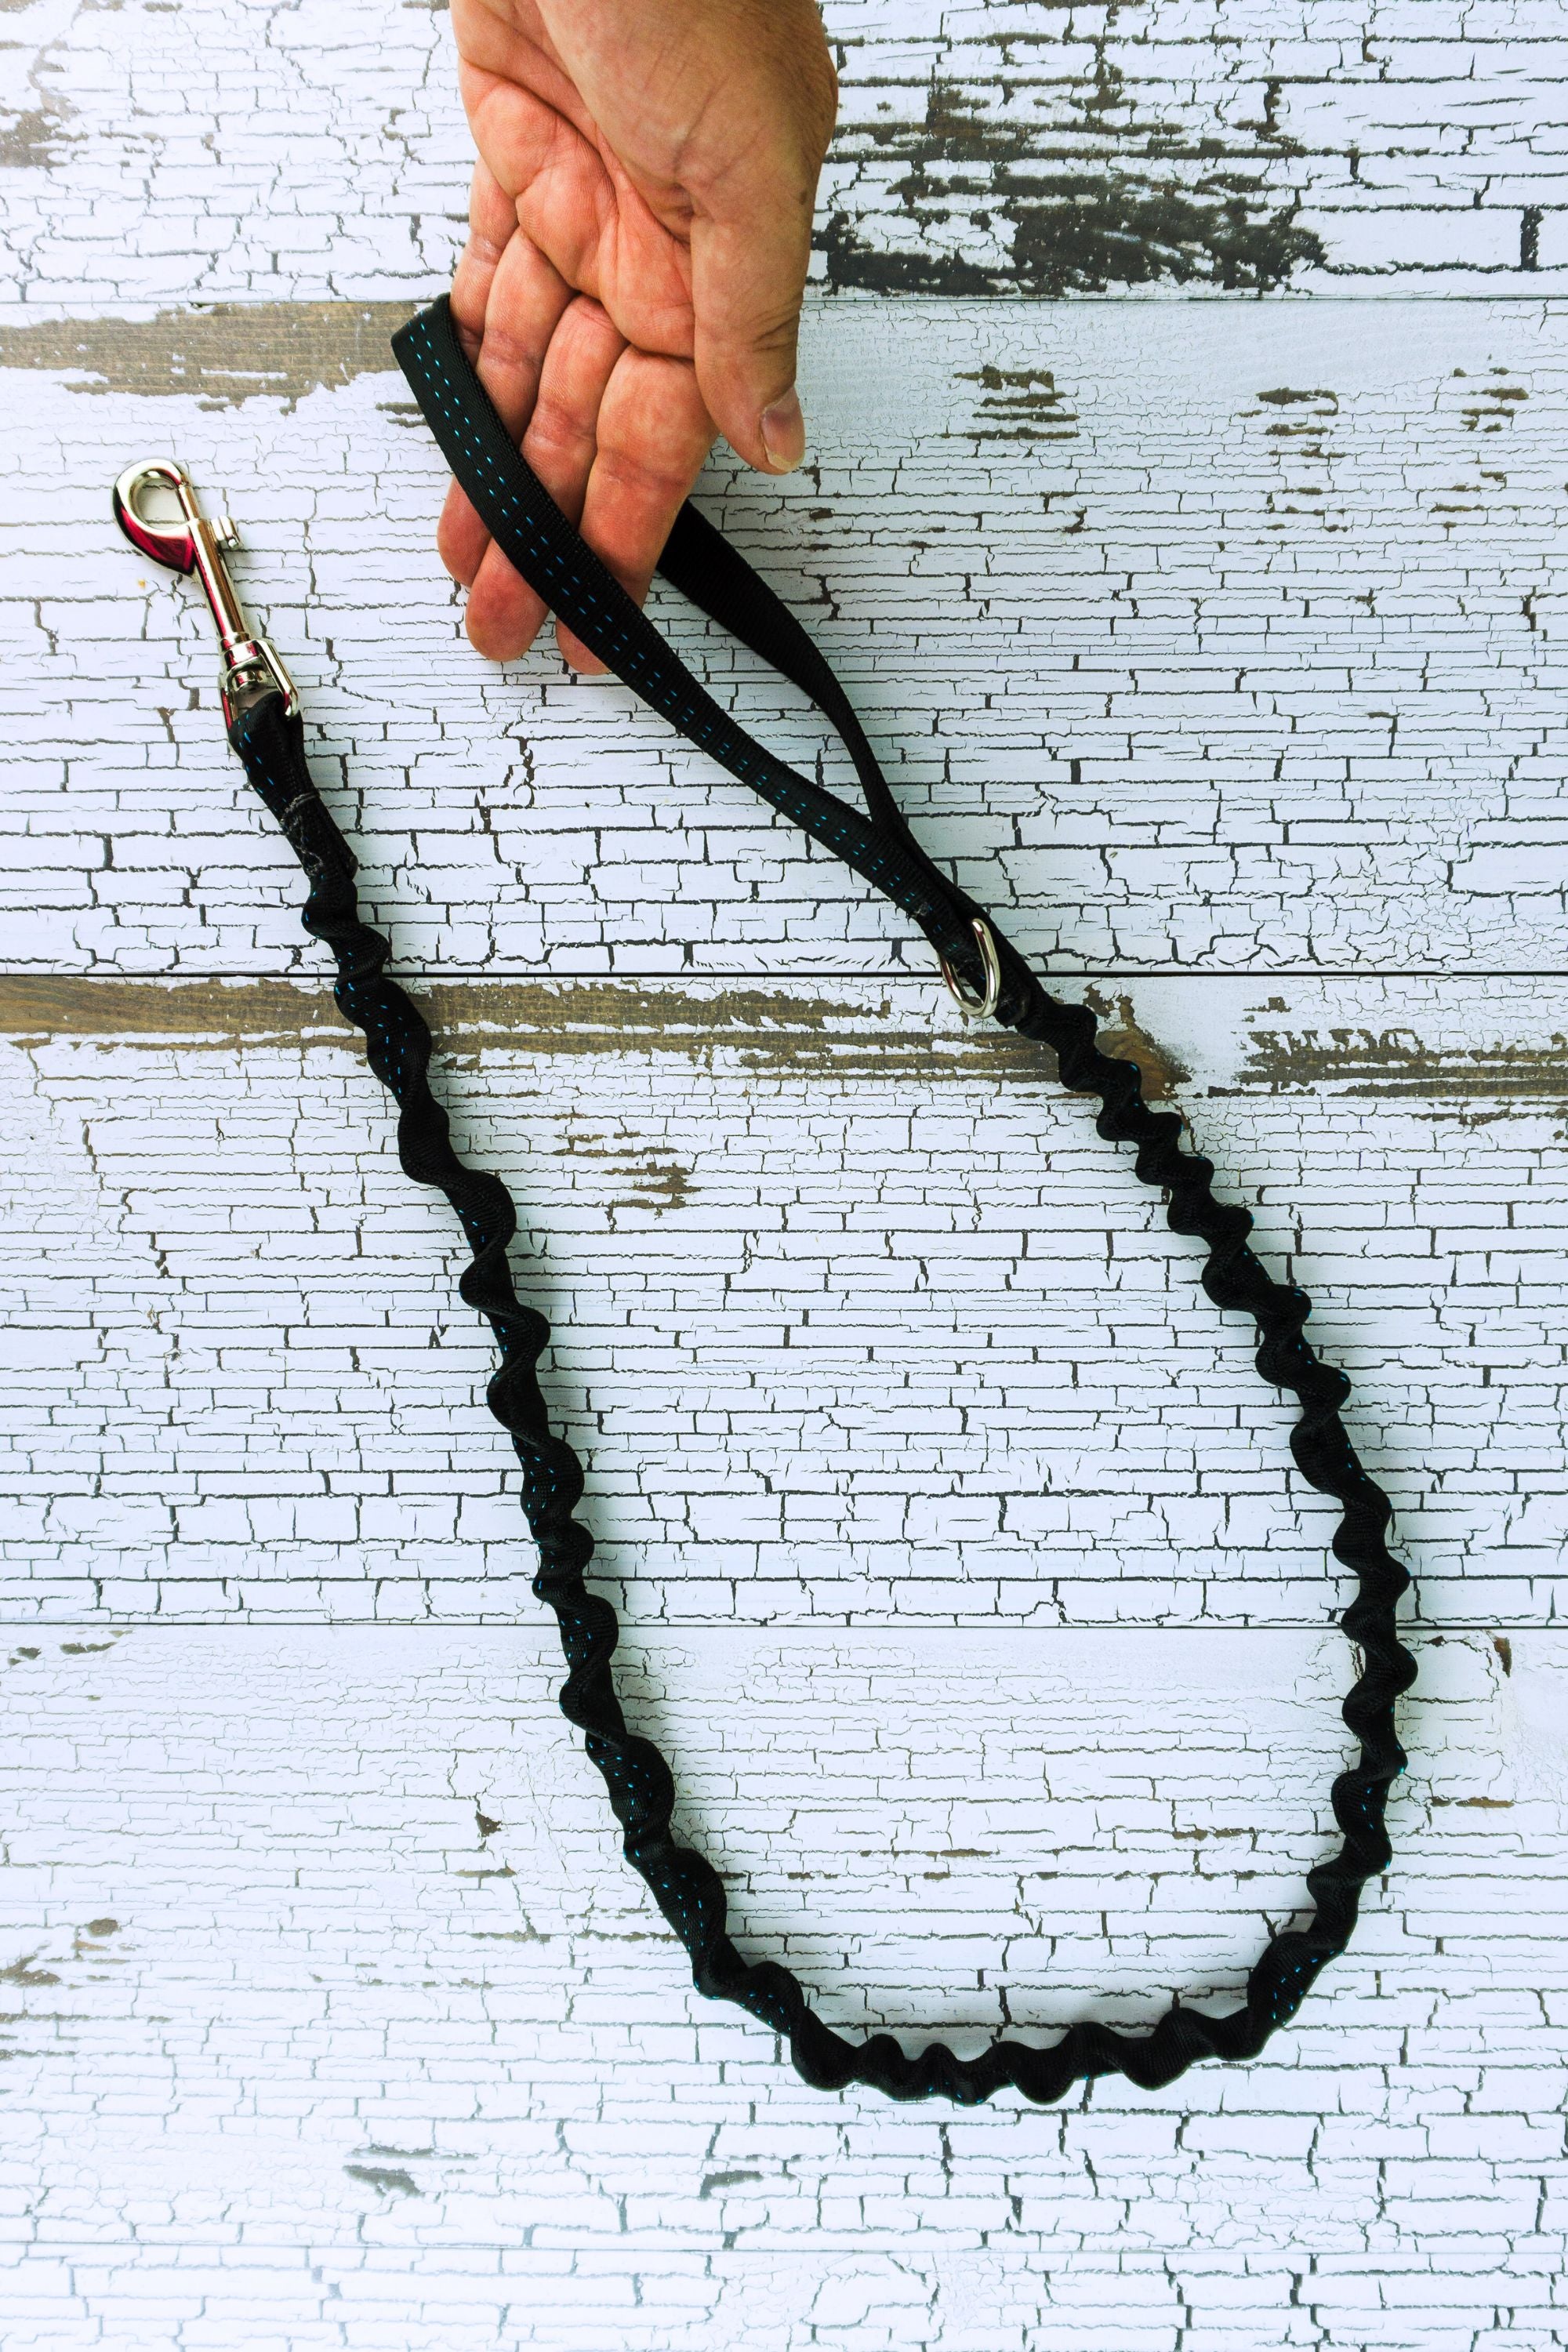 Handheld bungee leash is shown with an adult hand for scale holding the loop handle, image also shows the D ring that is between the loop handle and the stretch portion of the leash.